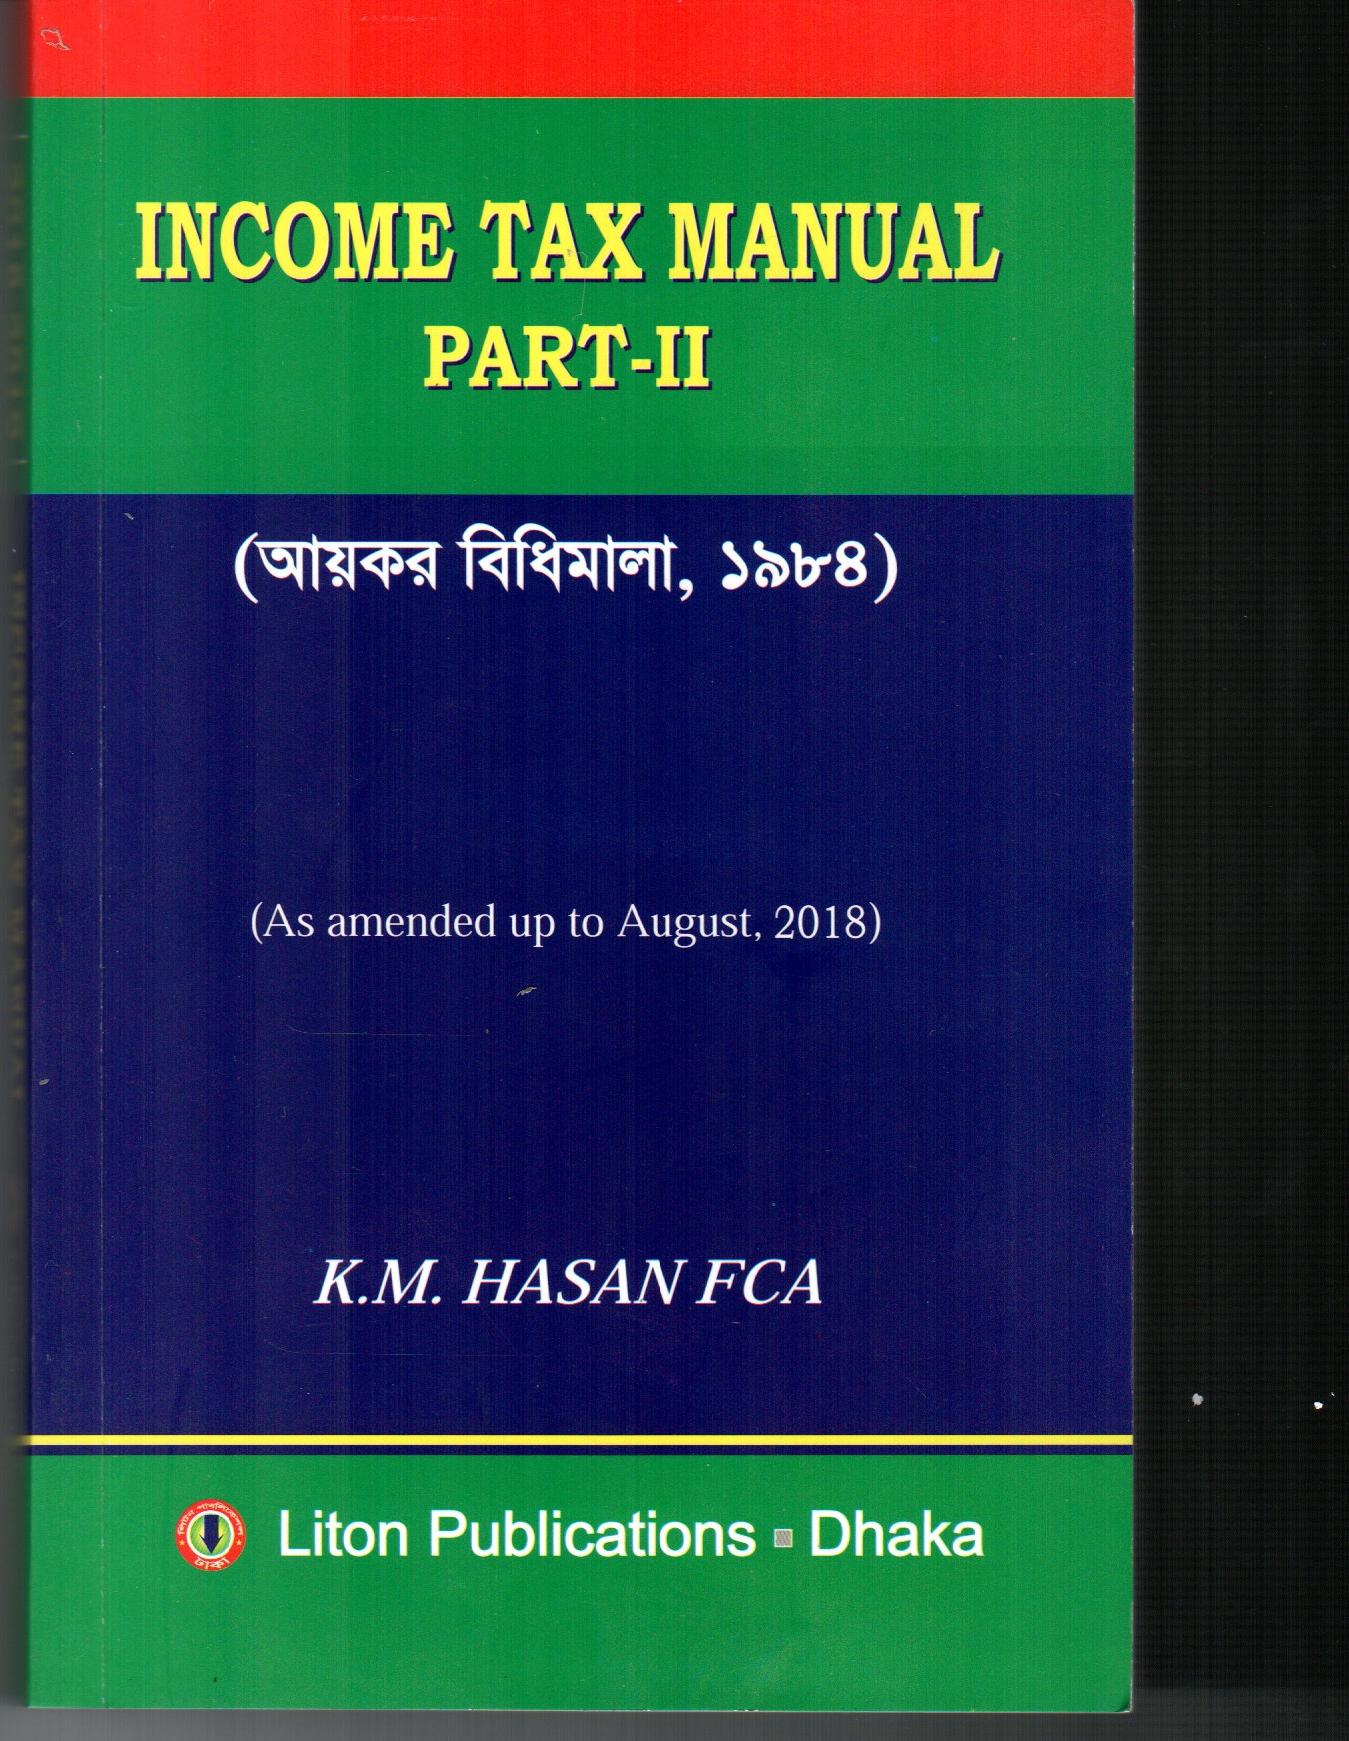 INCOME TAX MANUAL PART-2